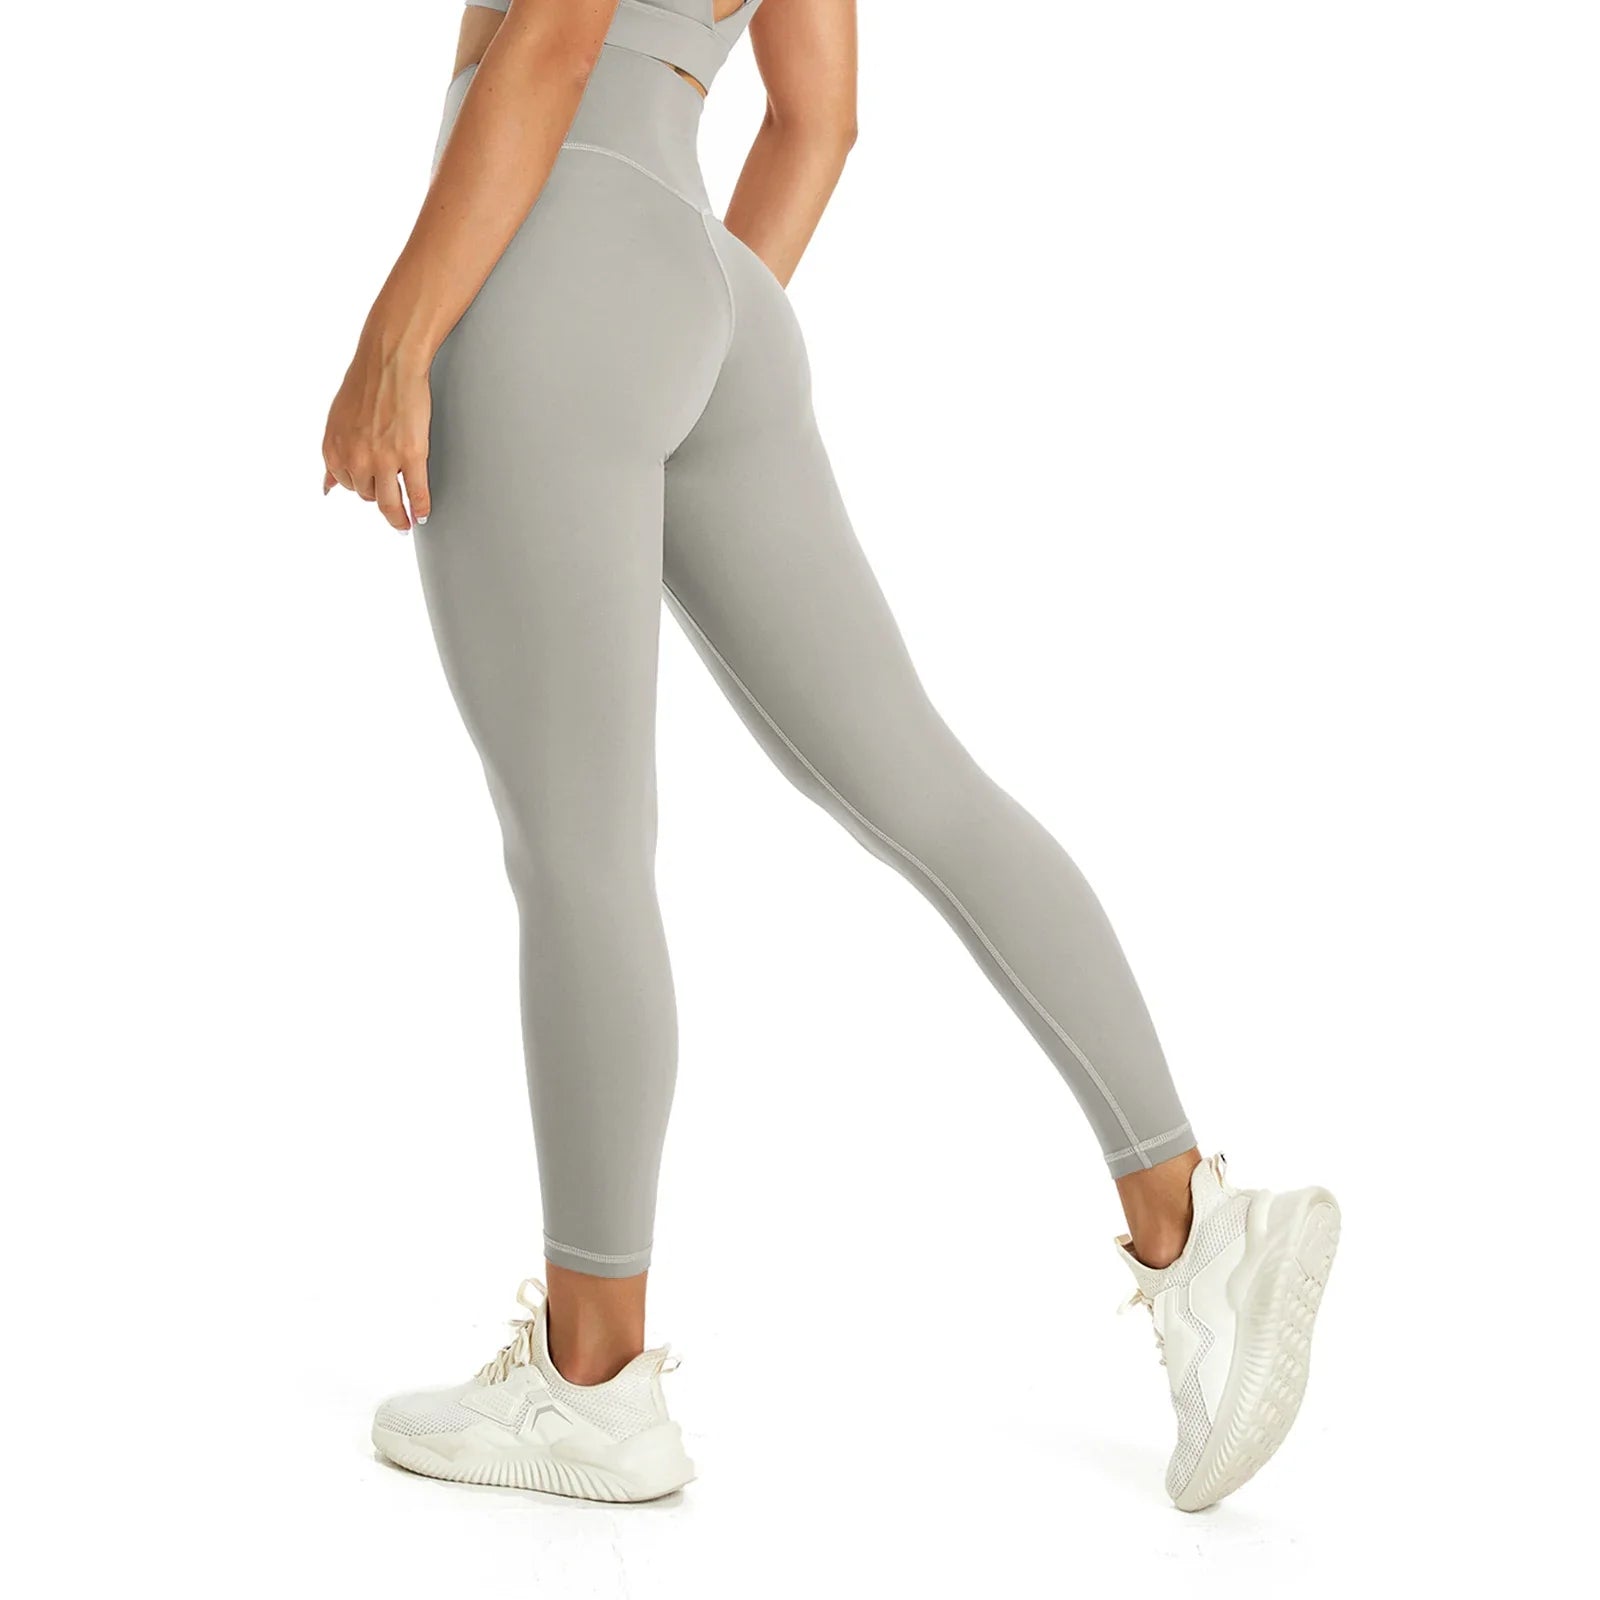 Canmol 25" Seamless Leggings: Buttery Soft Yoga Pants for Women, Workout, Gym, Fitness